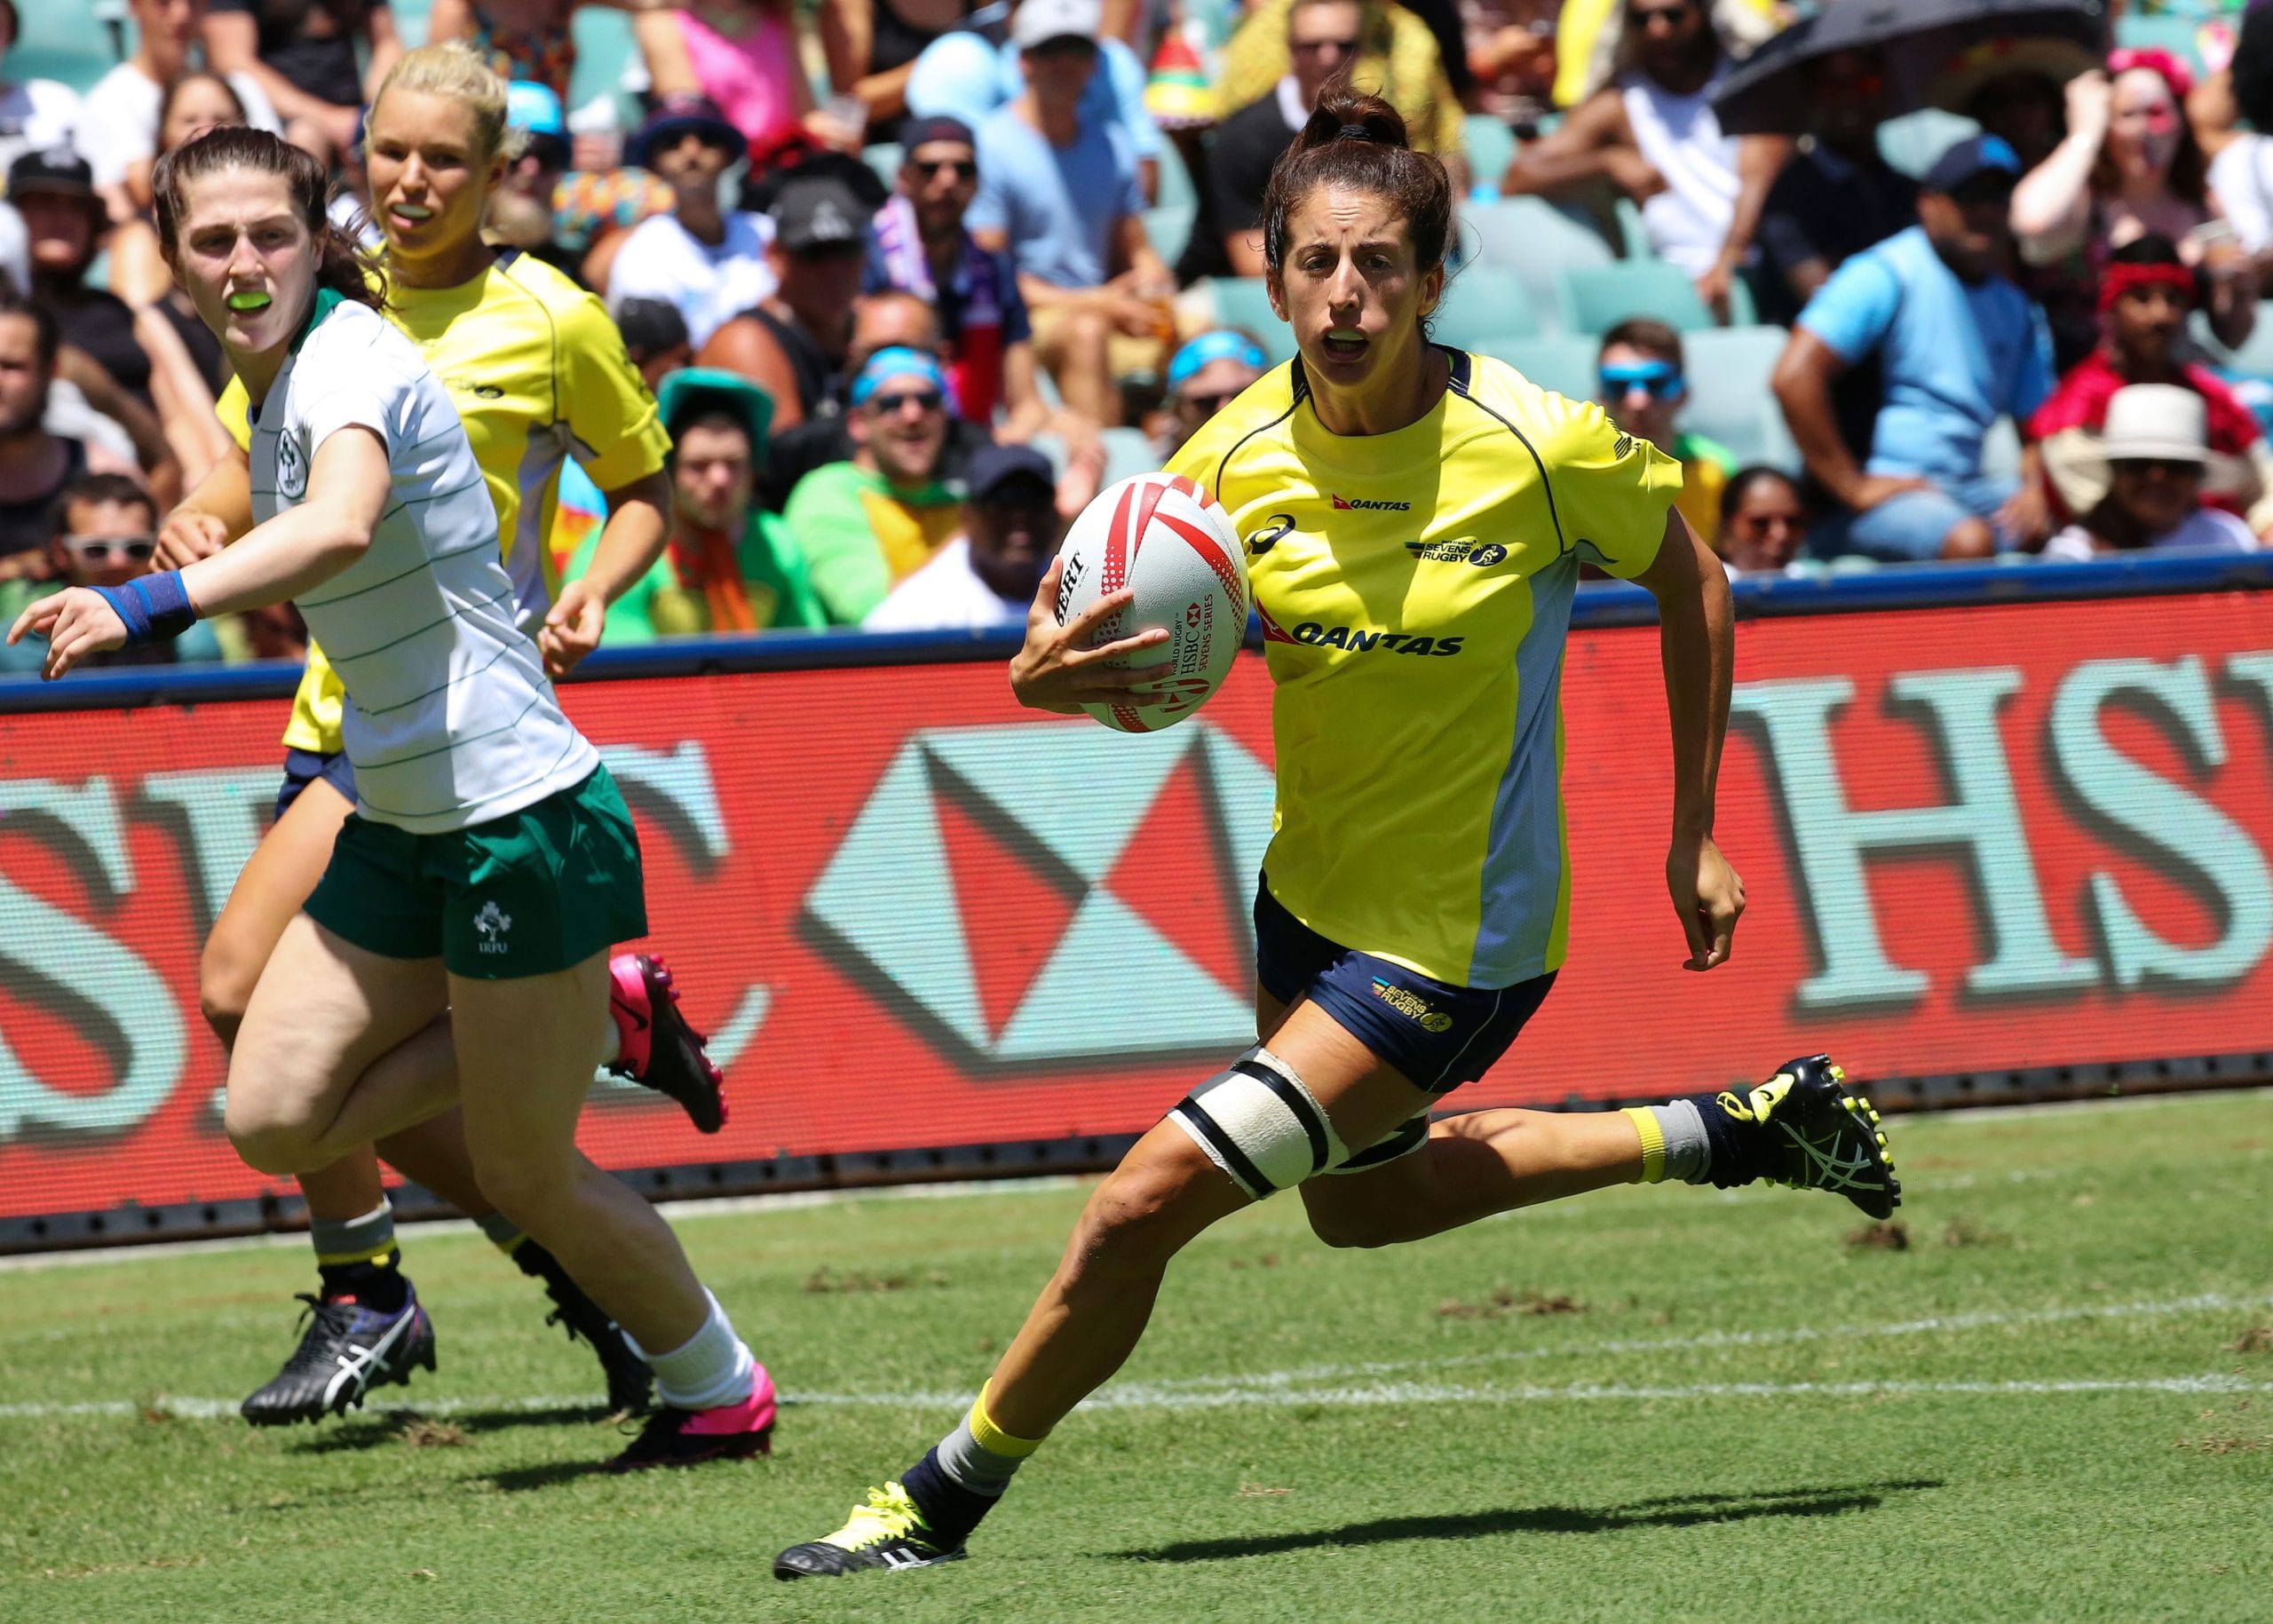 Alicia Quirk playing rugby sevens